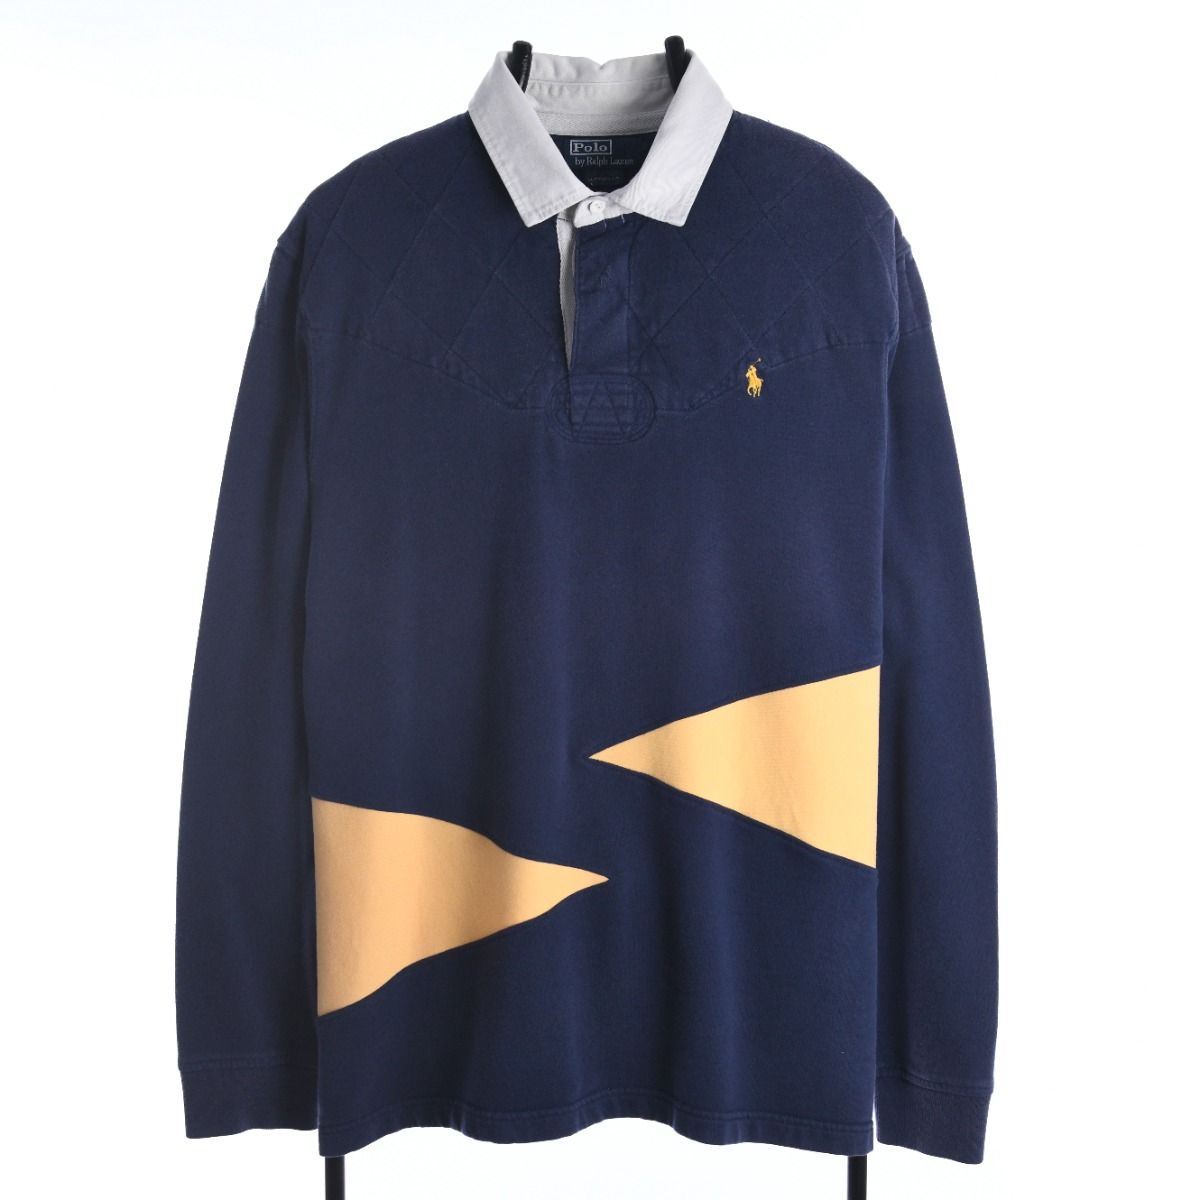 Polo Ralph Lauren REWORKED Rugby Shirt